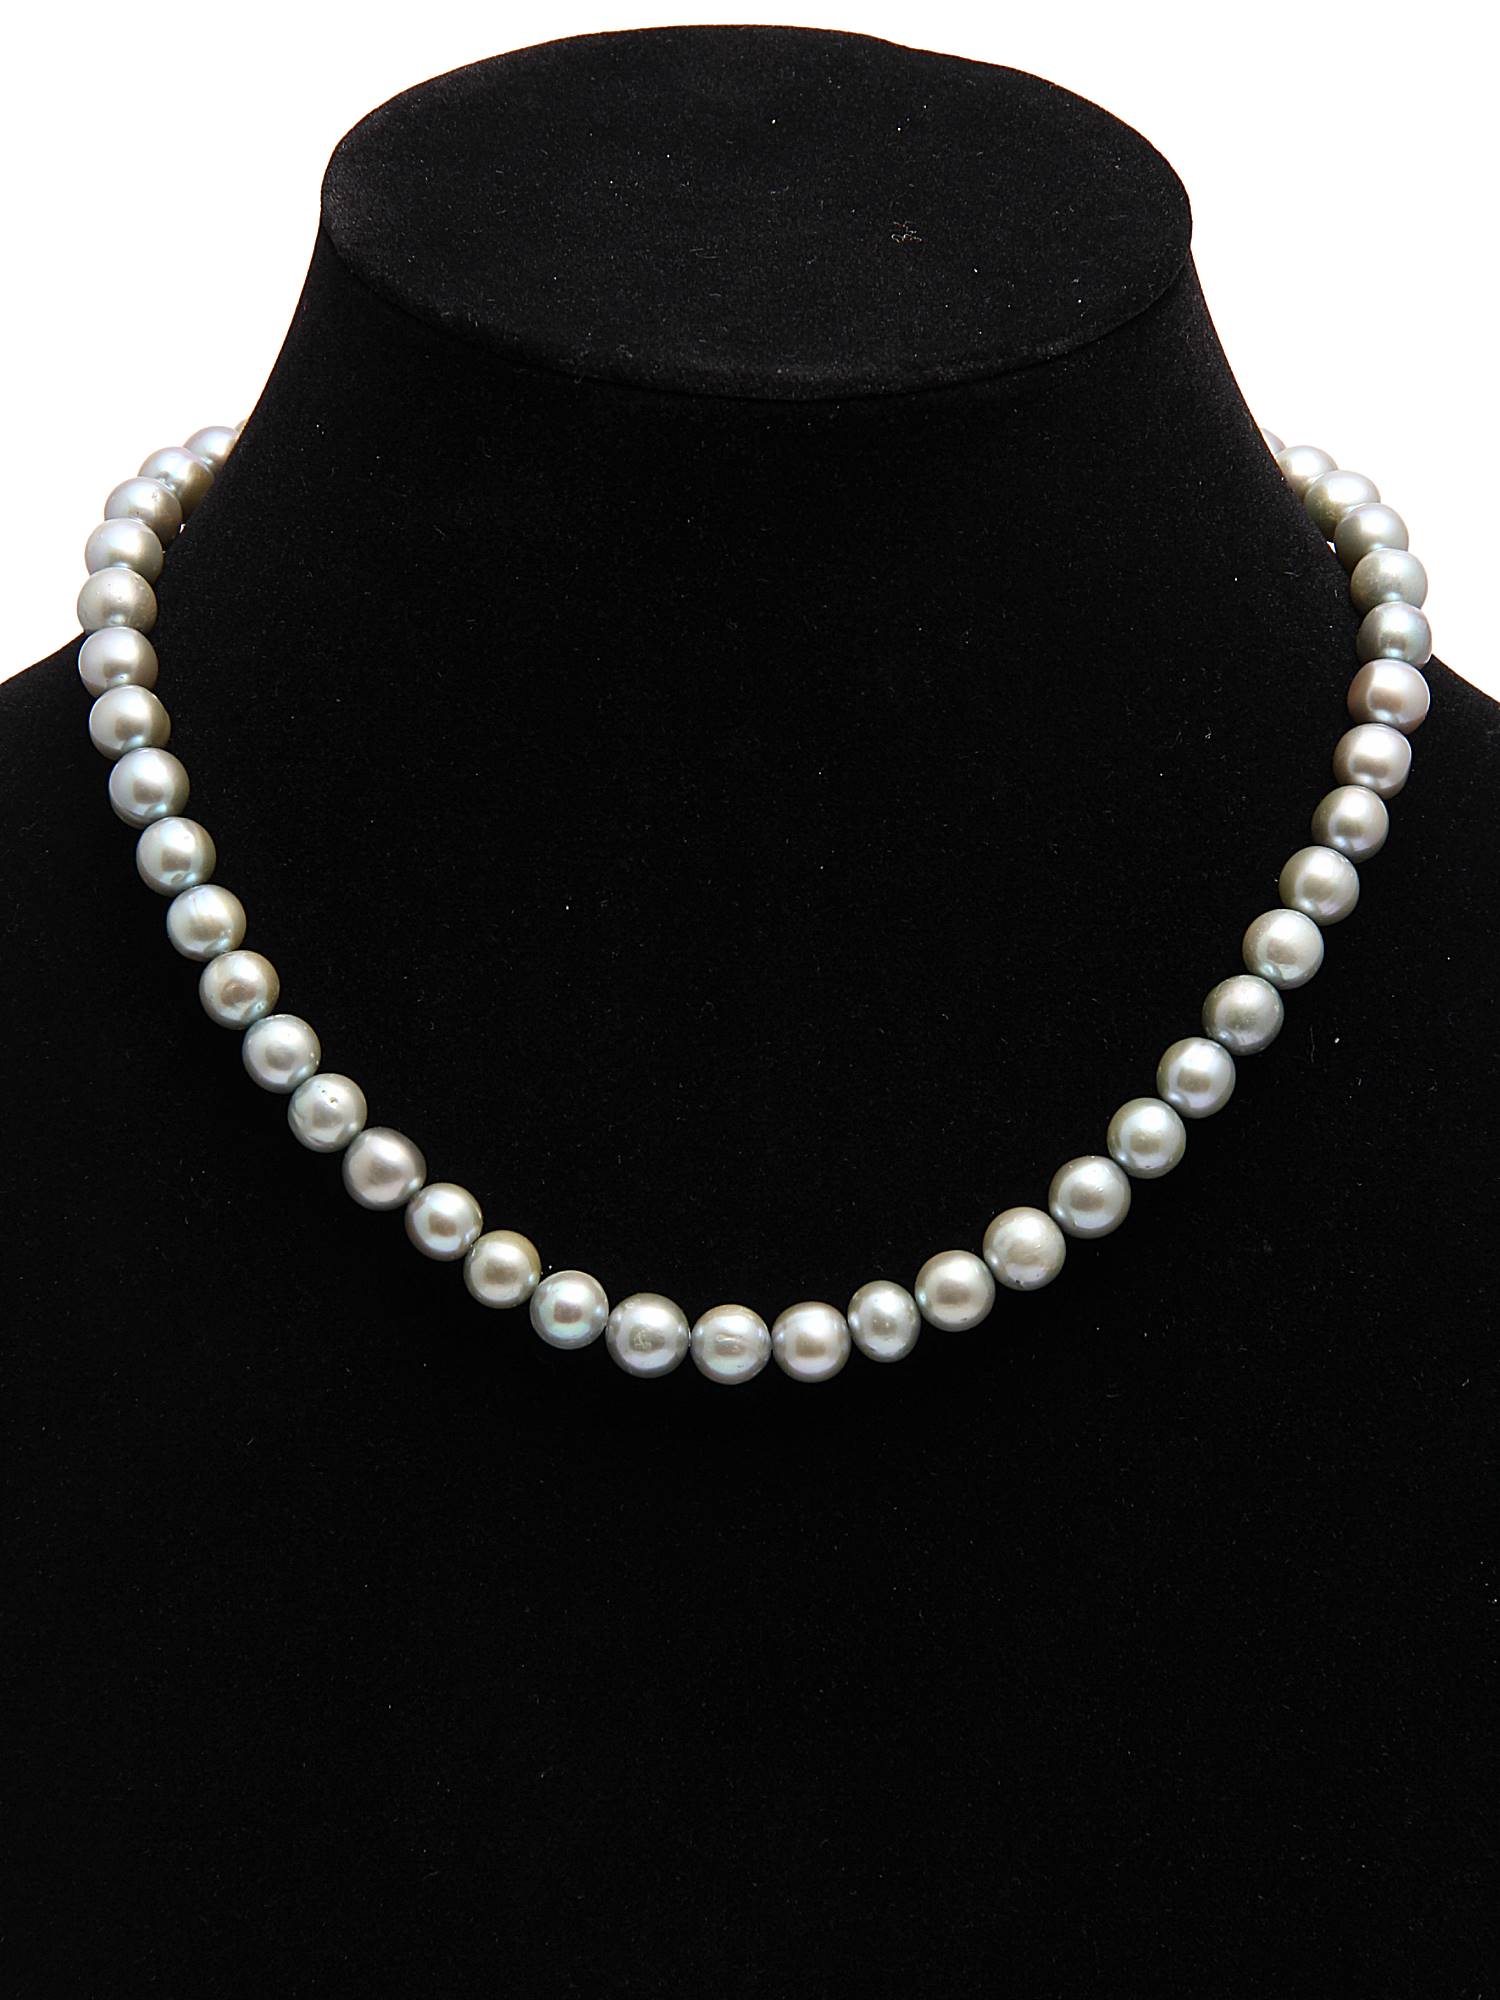 Round Silver Grey (8MM) Natural Freshwater Real Pearl Necklace with 92.5 Sterling Silver Clasp, 235 carats - (F1012)